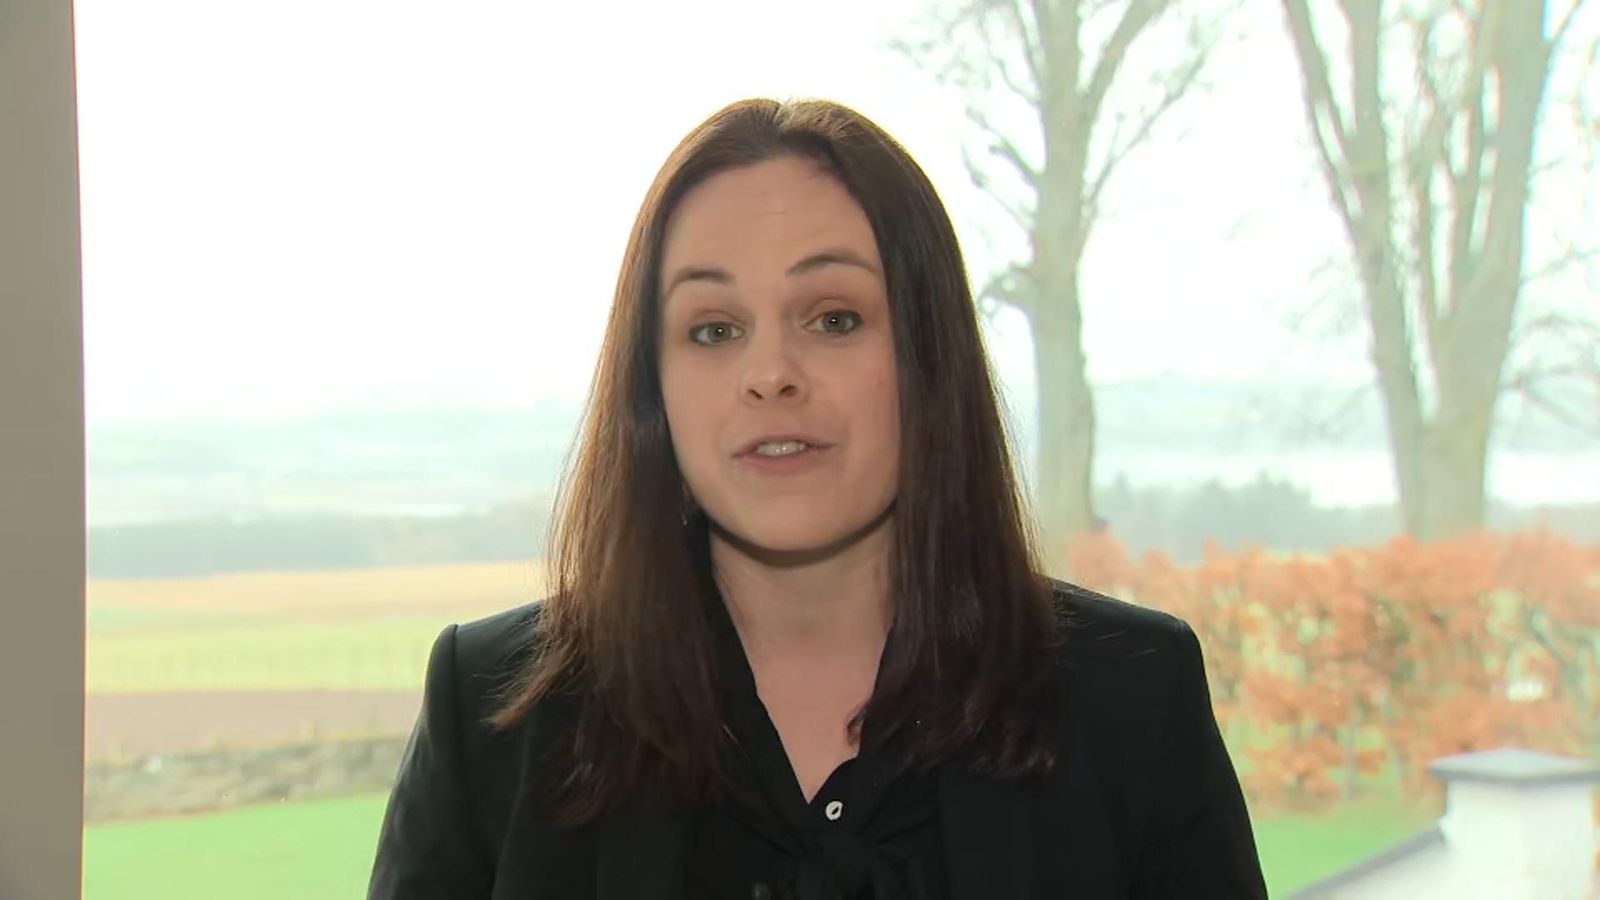 SNP candidate Kate Forbes insists she has 'progressive views' after gay marriage backlash